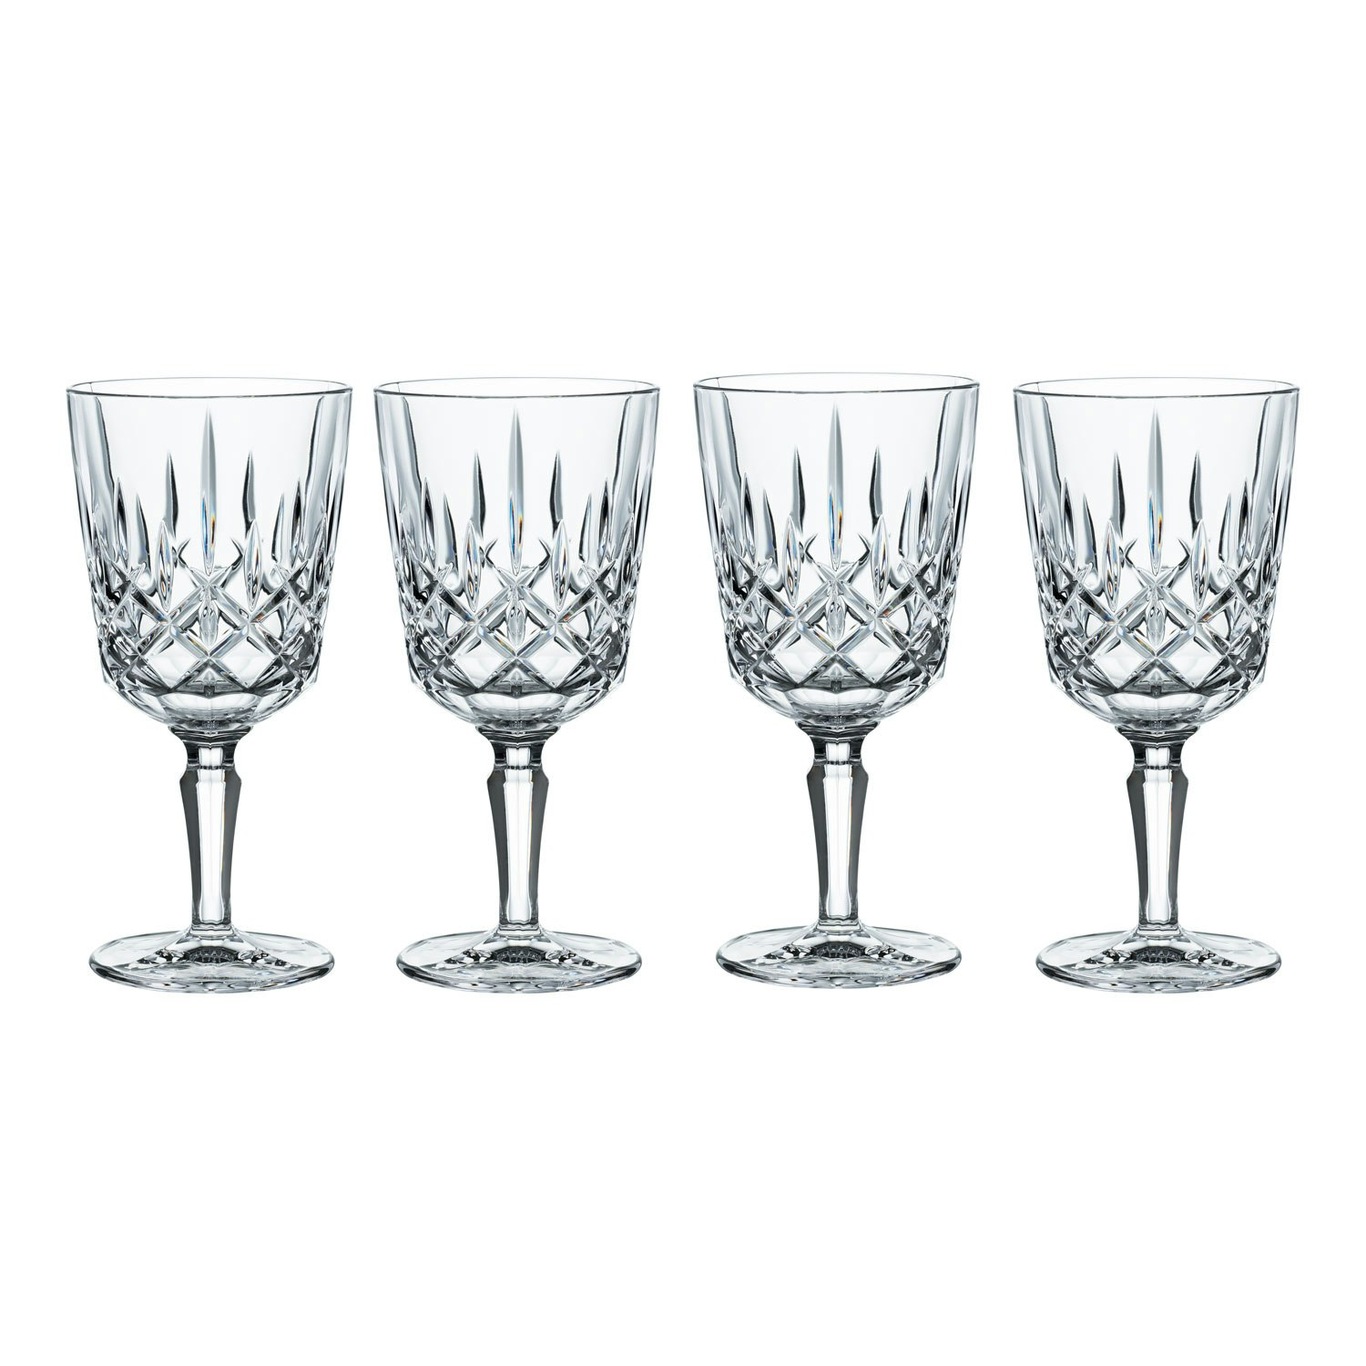 https://royaldesign.com/image/2/nachtmann-noblesse-wine-glass-4-pack-35-cl-0?w=800&quality=80